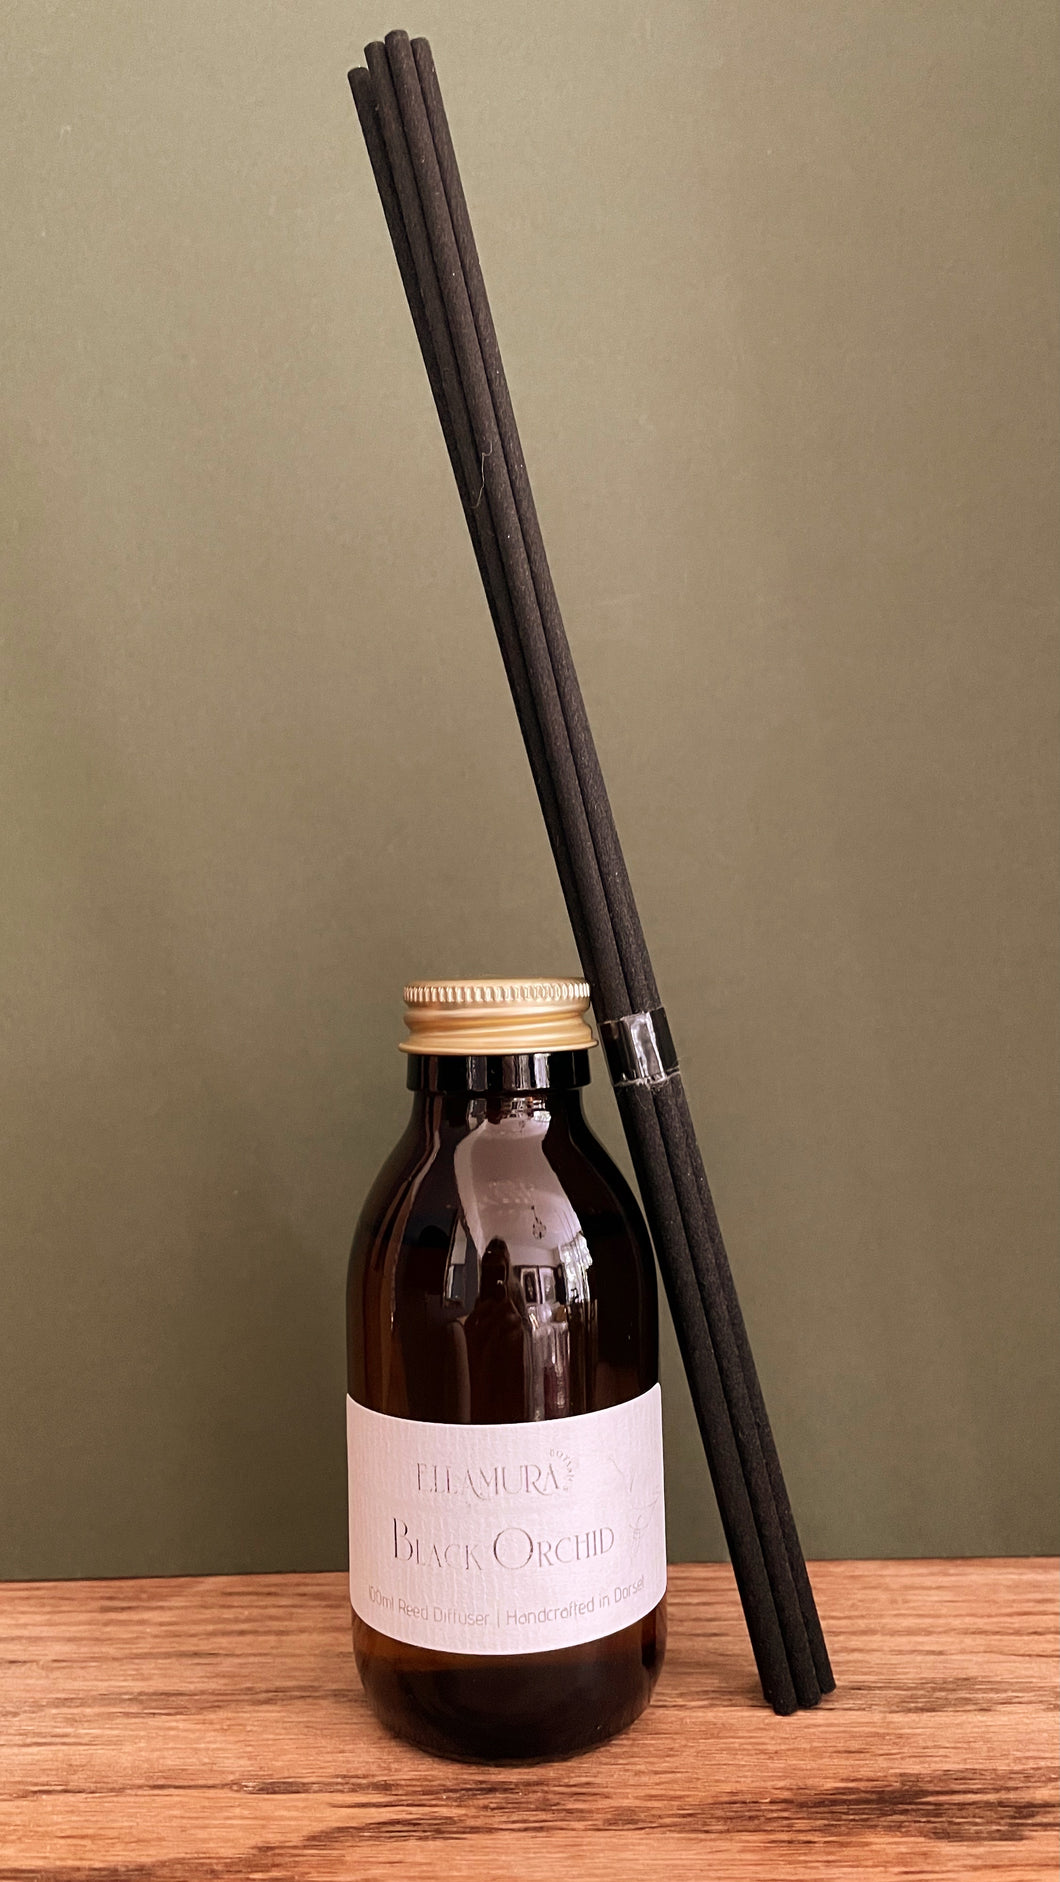 Black Orchid reed diffuser